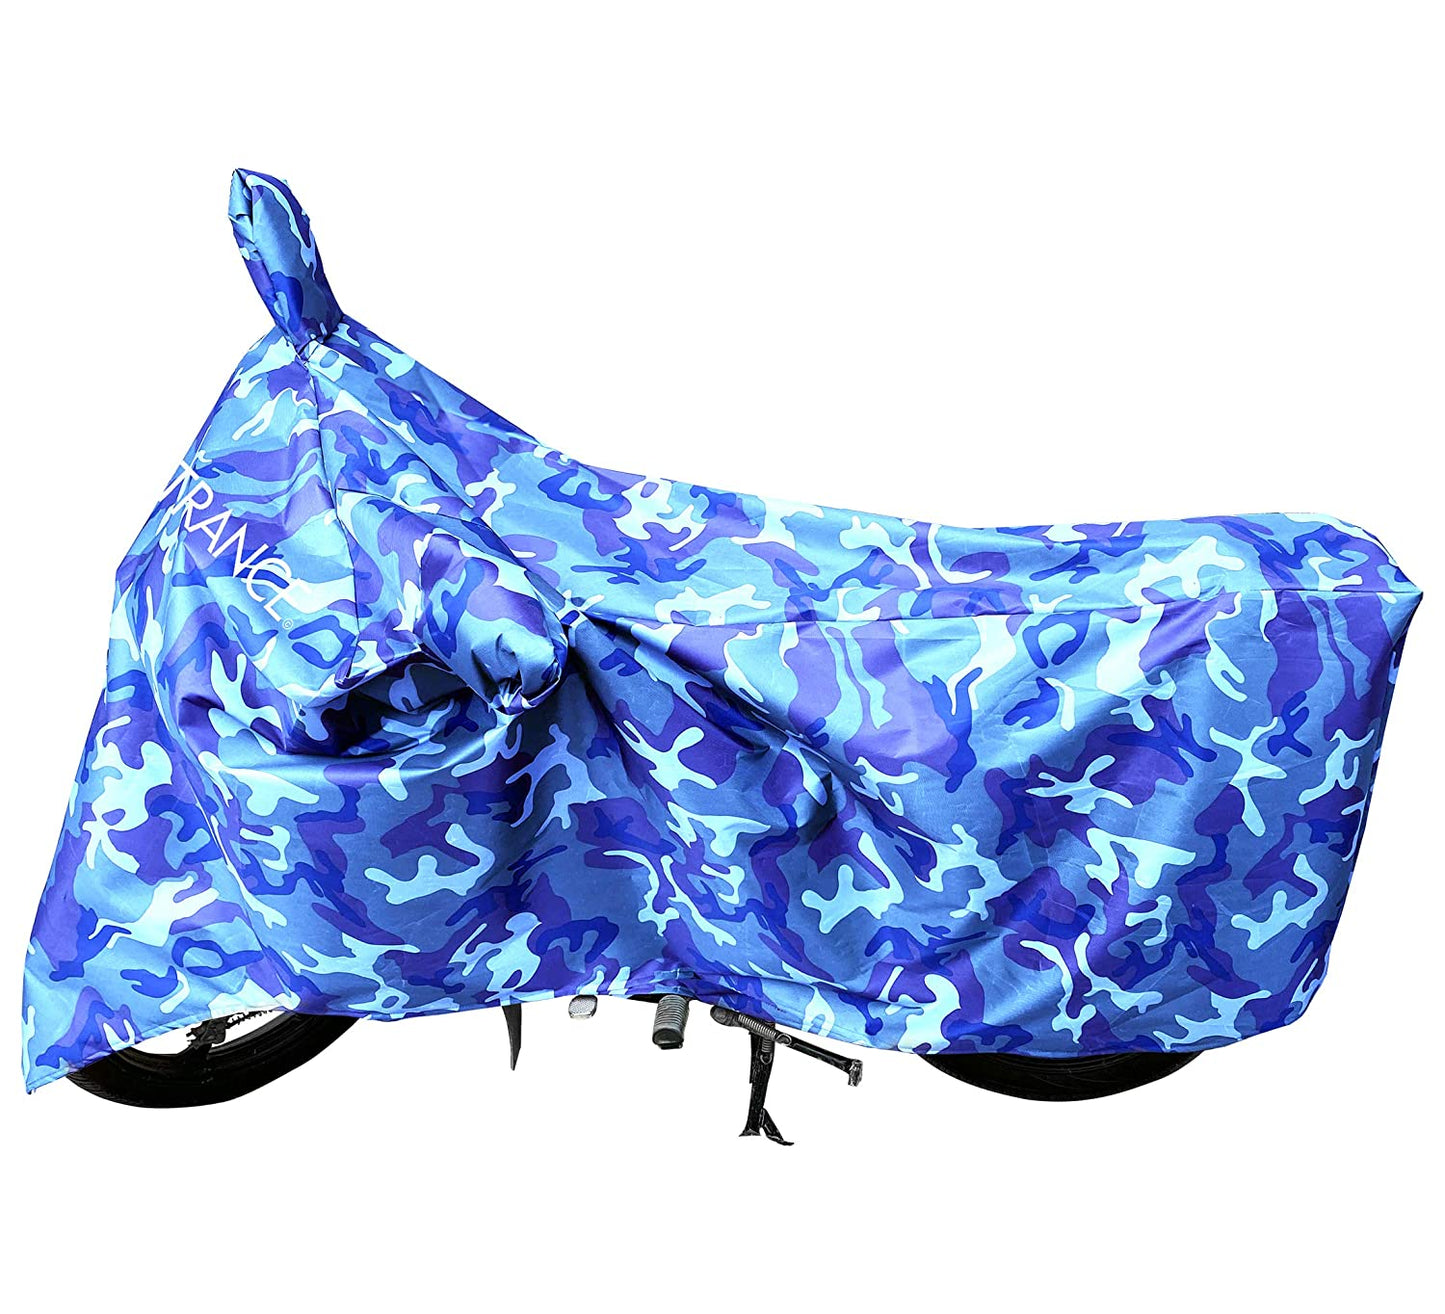 MotoTrance Jungle Bike Body Covers For Royal Enfield Continental GT - Interlock-Stitched Waterproof and Heat Resistant with Mirror Pockets